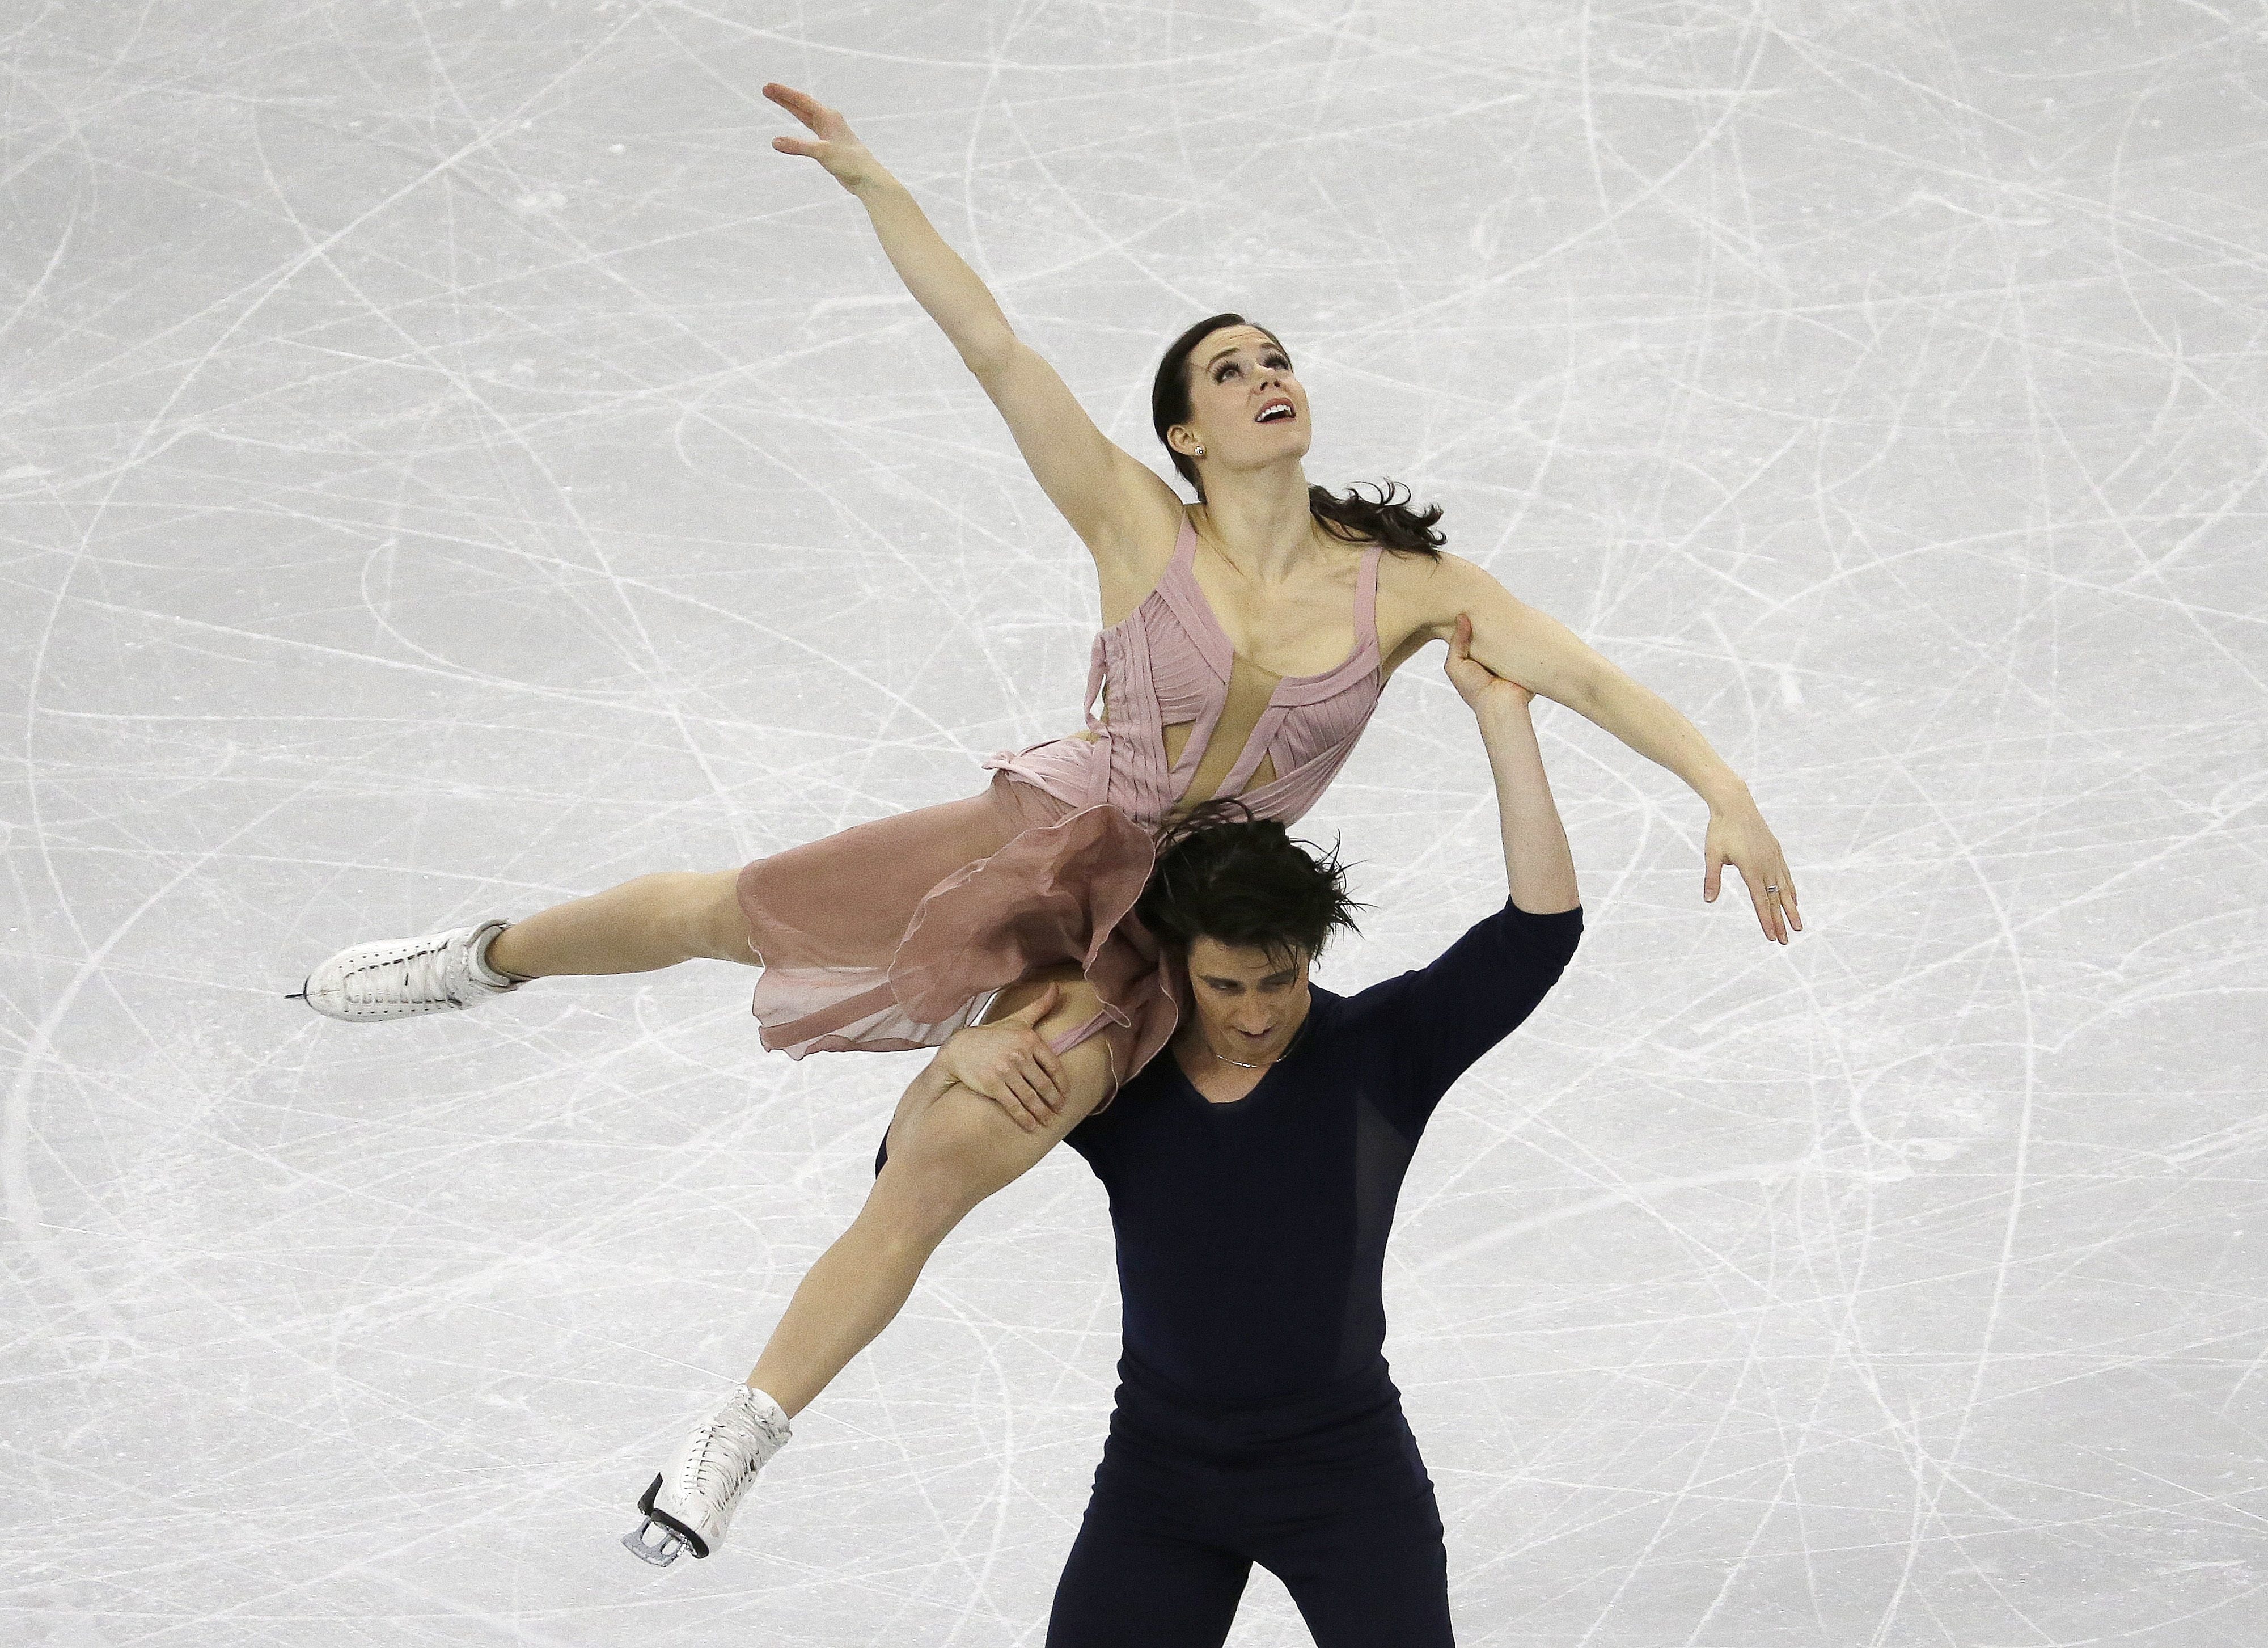 Gold medalists Tessa Virtue and Scott Moir of Canada perform in the Ice Dance Free Dance at the ISU Four Continents Figure Skating Championships in Gangneung, South Korea, Friday, Feb. 17, 2017. (AP Photo/Ahn Young-joon)